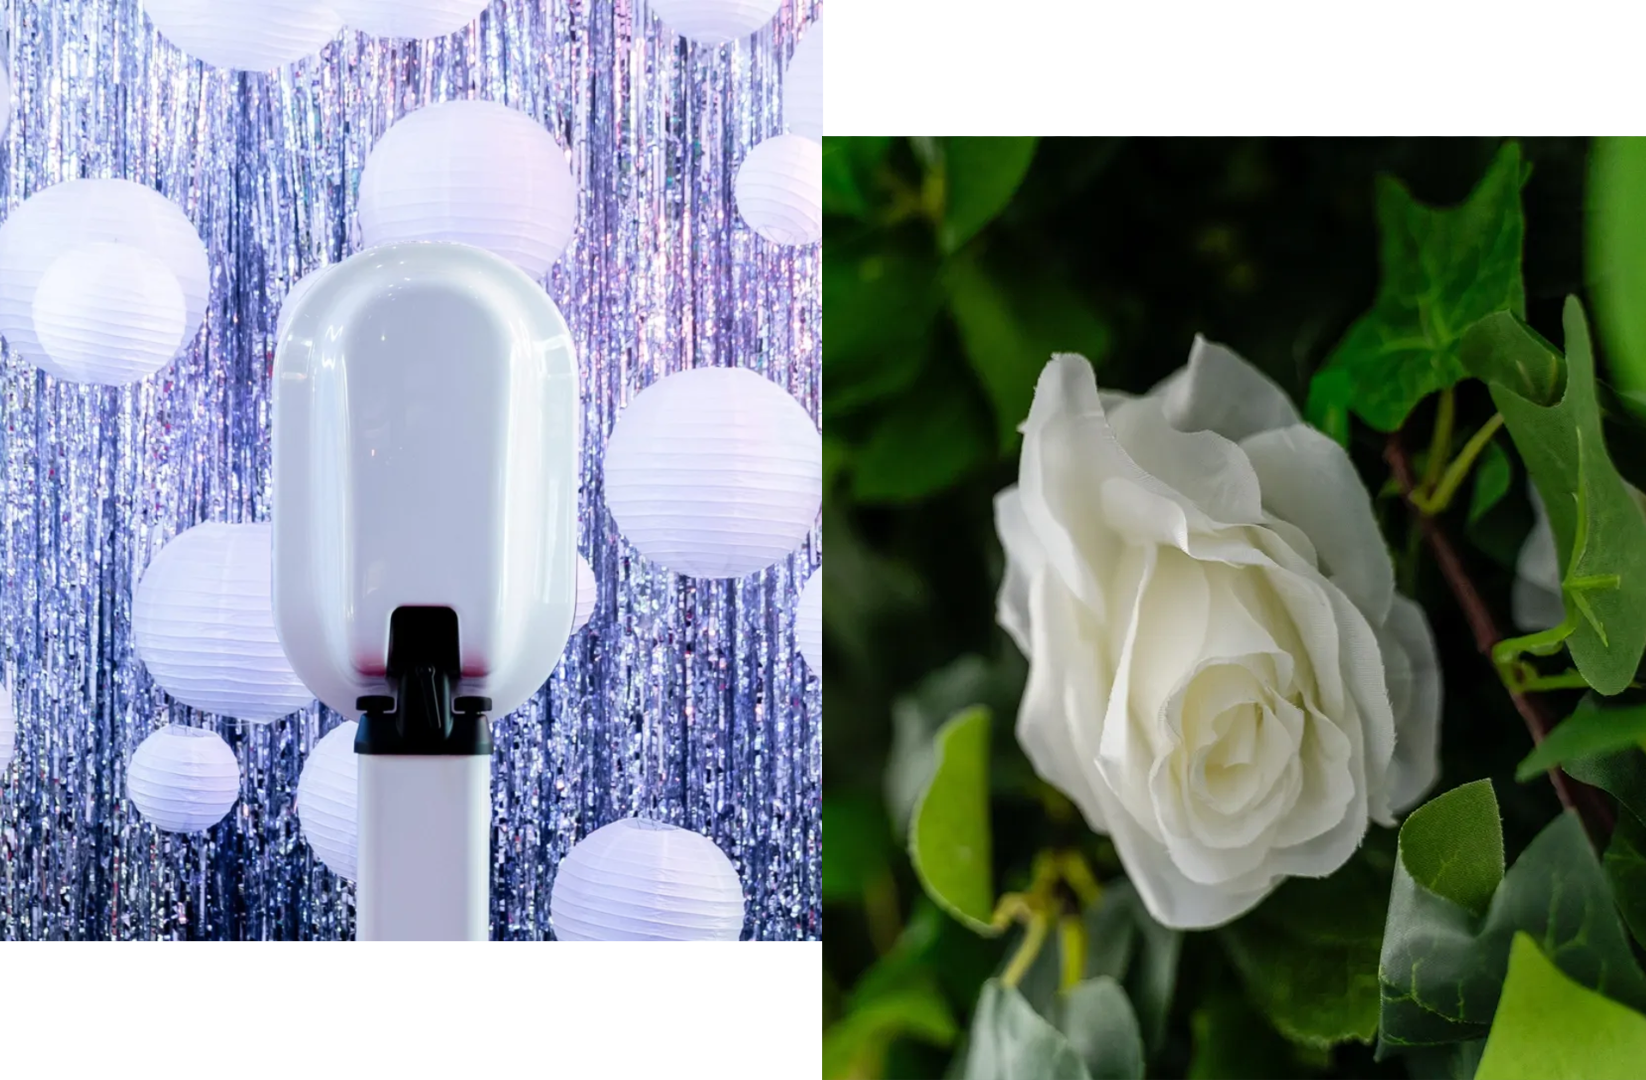 A white rose and a green bush with lights